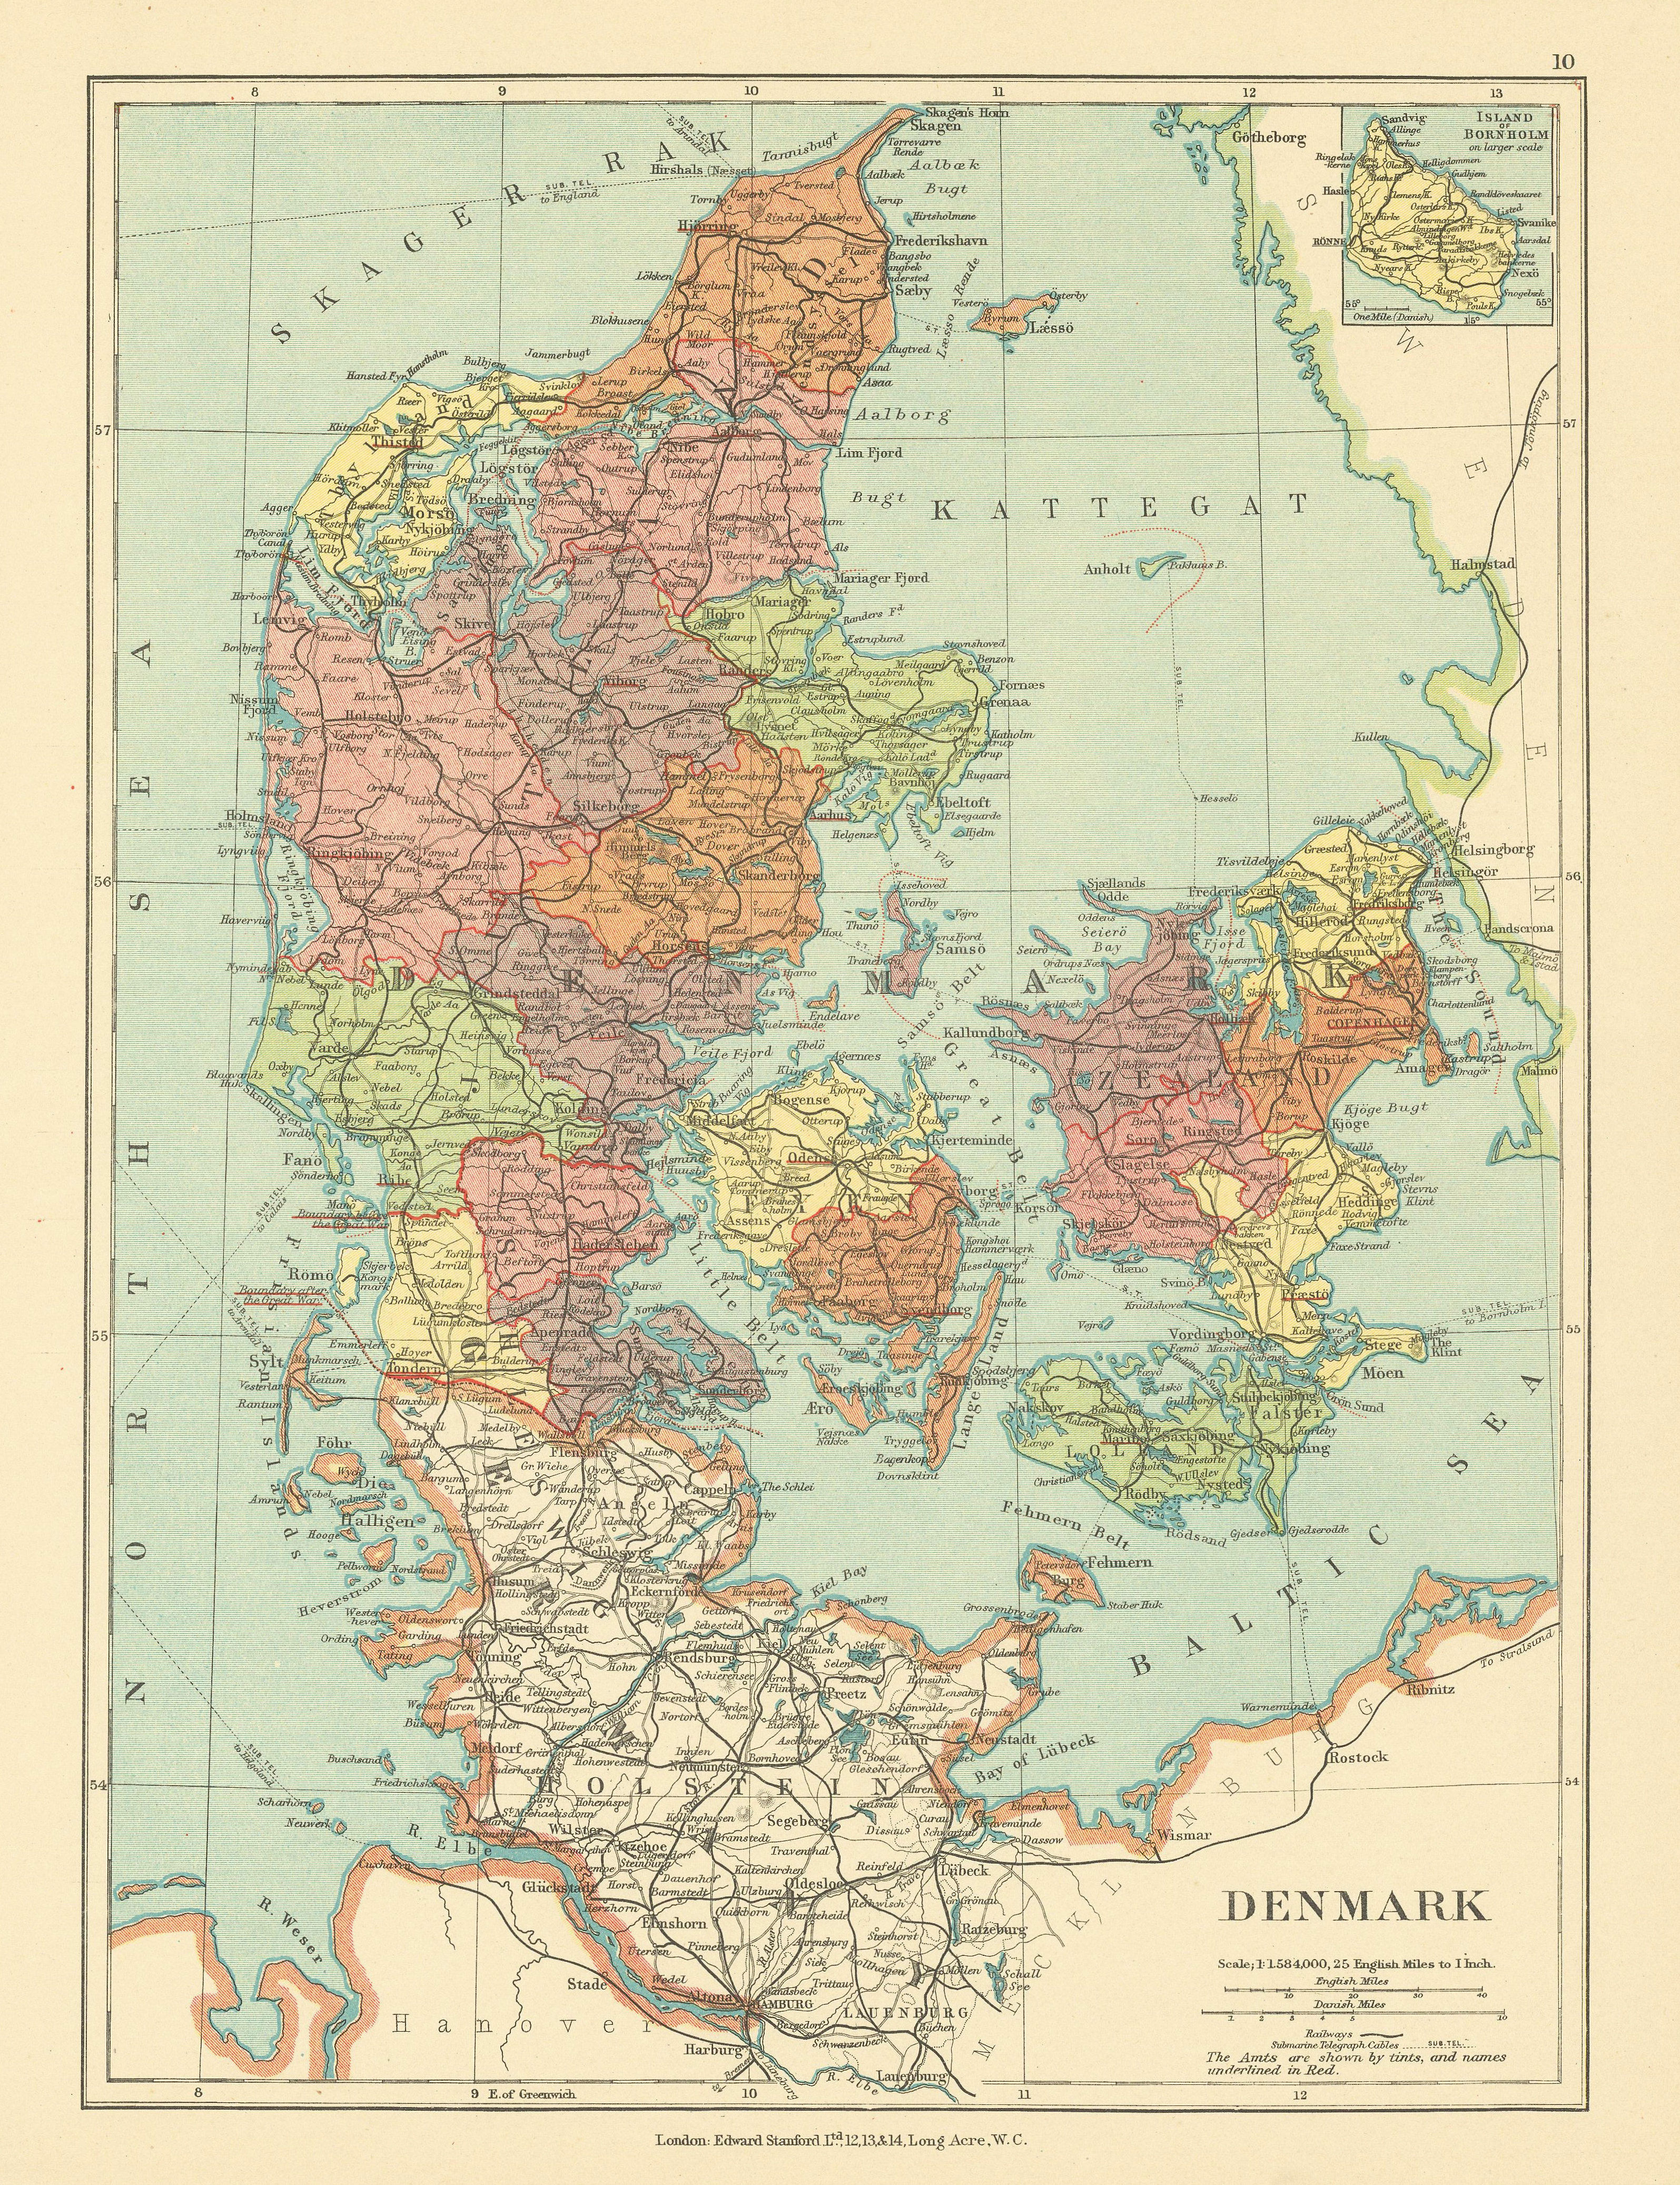 Associate Product Denmark in counties / amter. Railways. STANFORD c1925 old vintage map chart